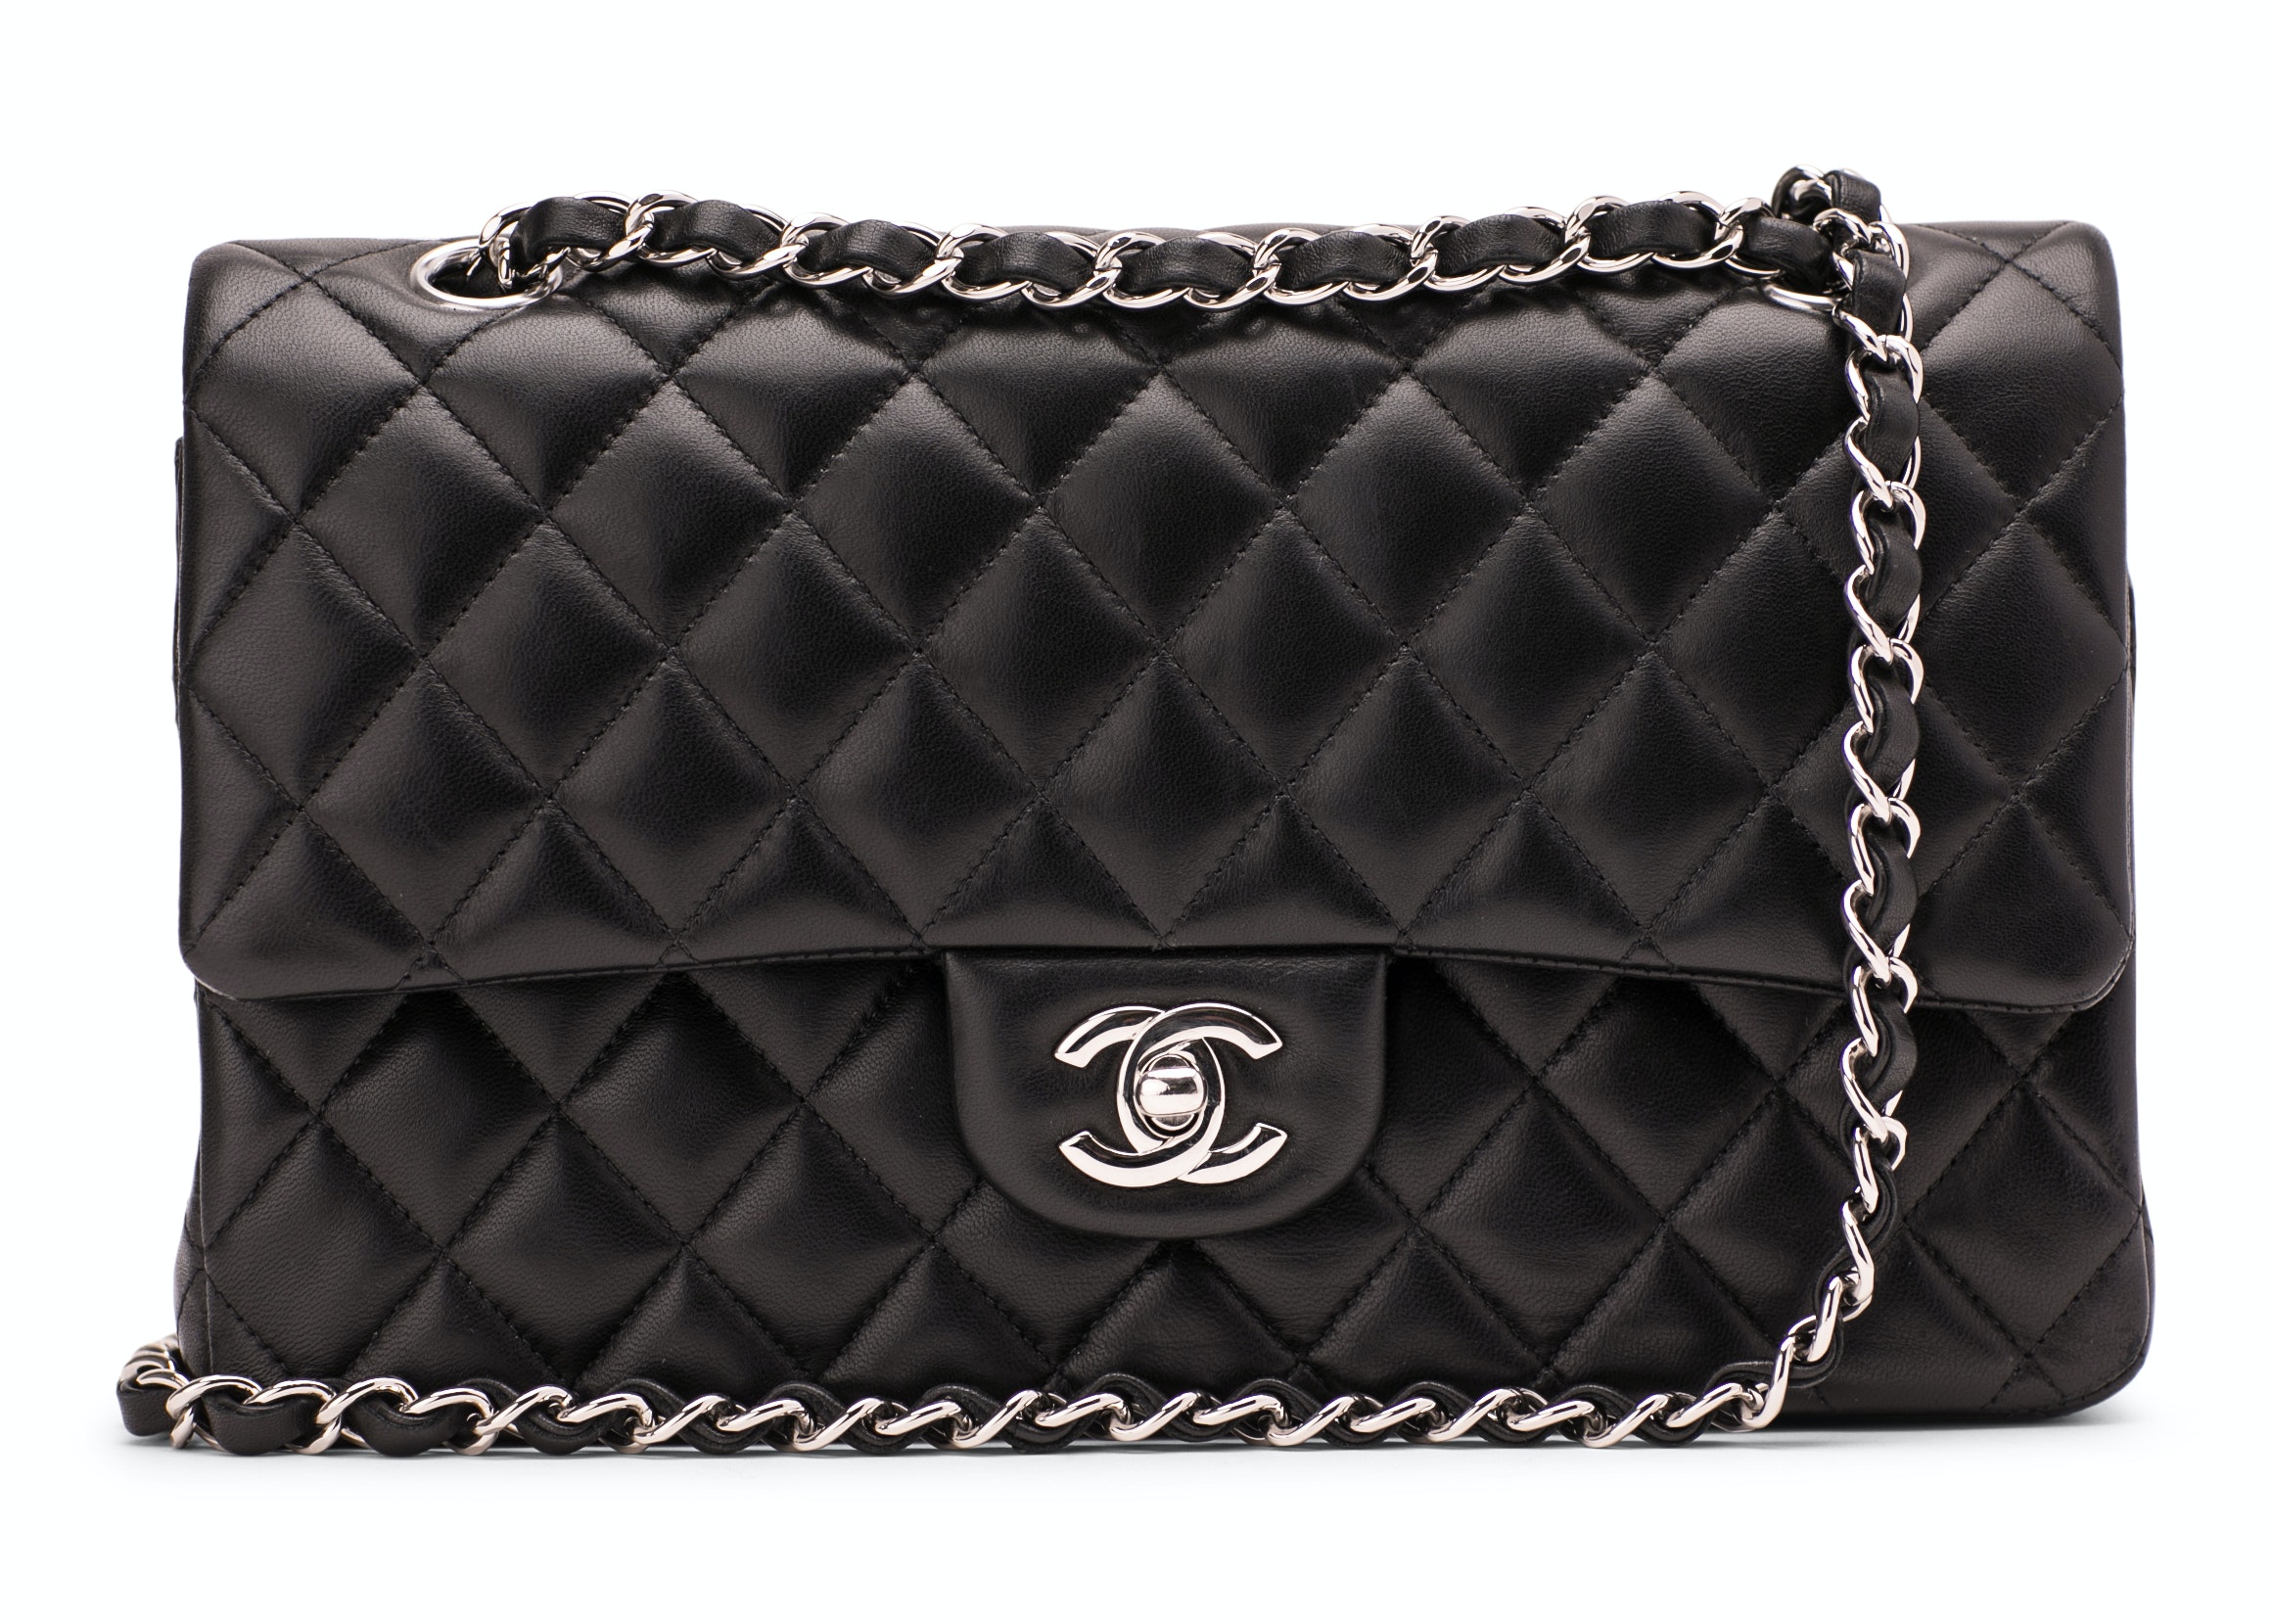 Vintage Chanel Bags  the ultimate guide to buying secondhand  HELLO